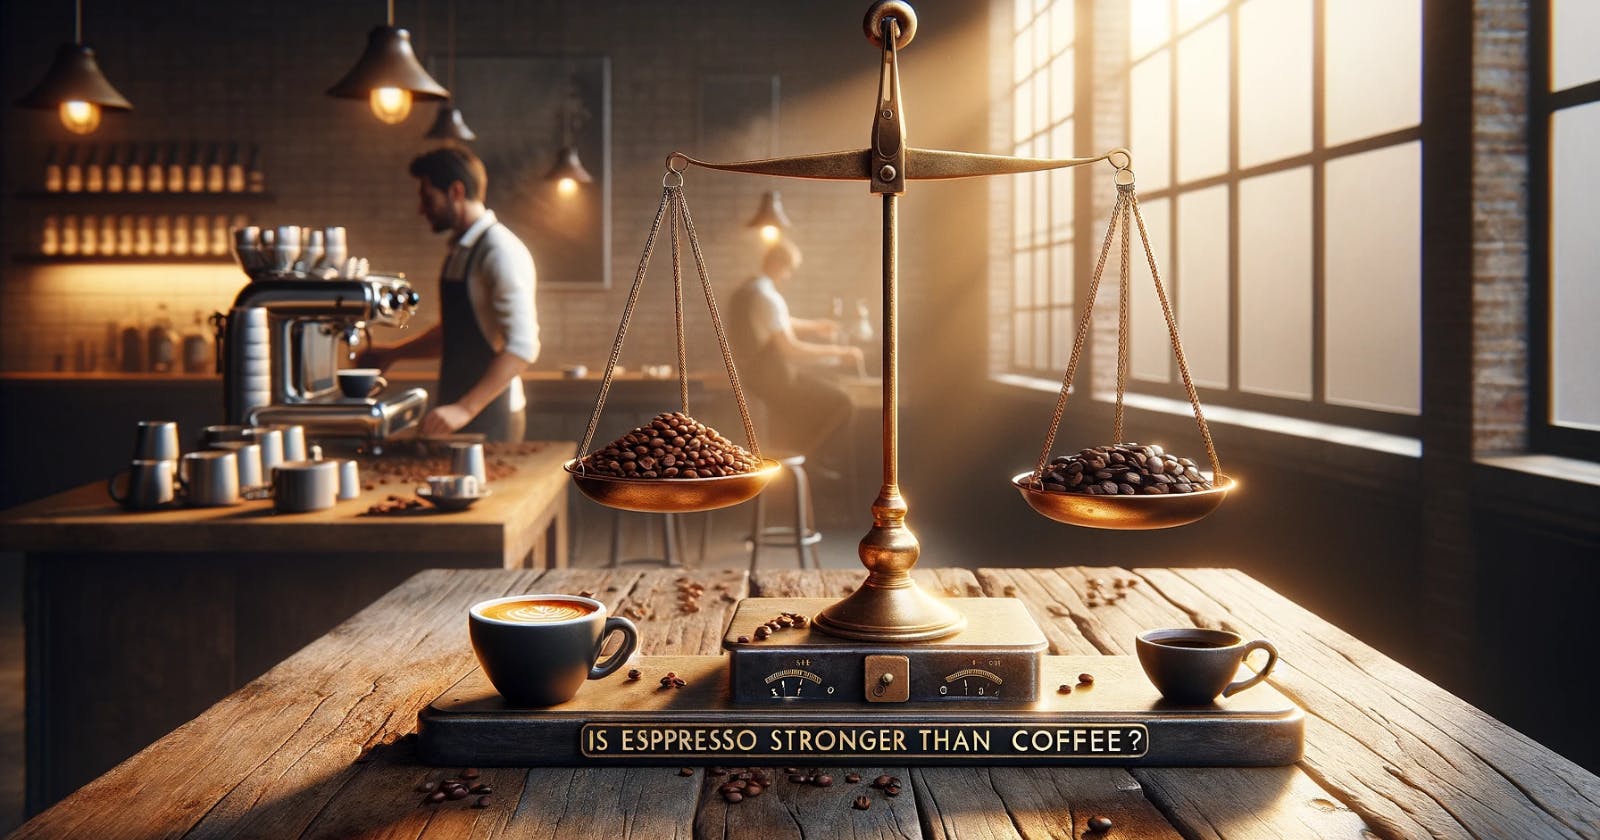 Is Espresso Stronger Than Coffee?